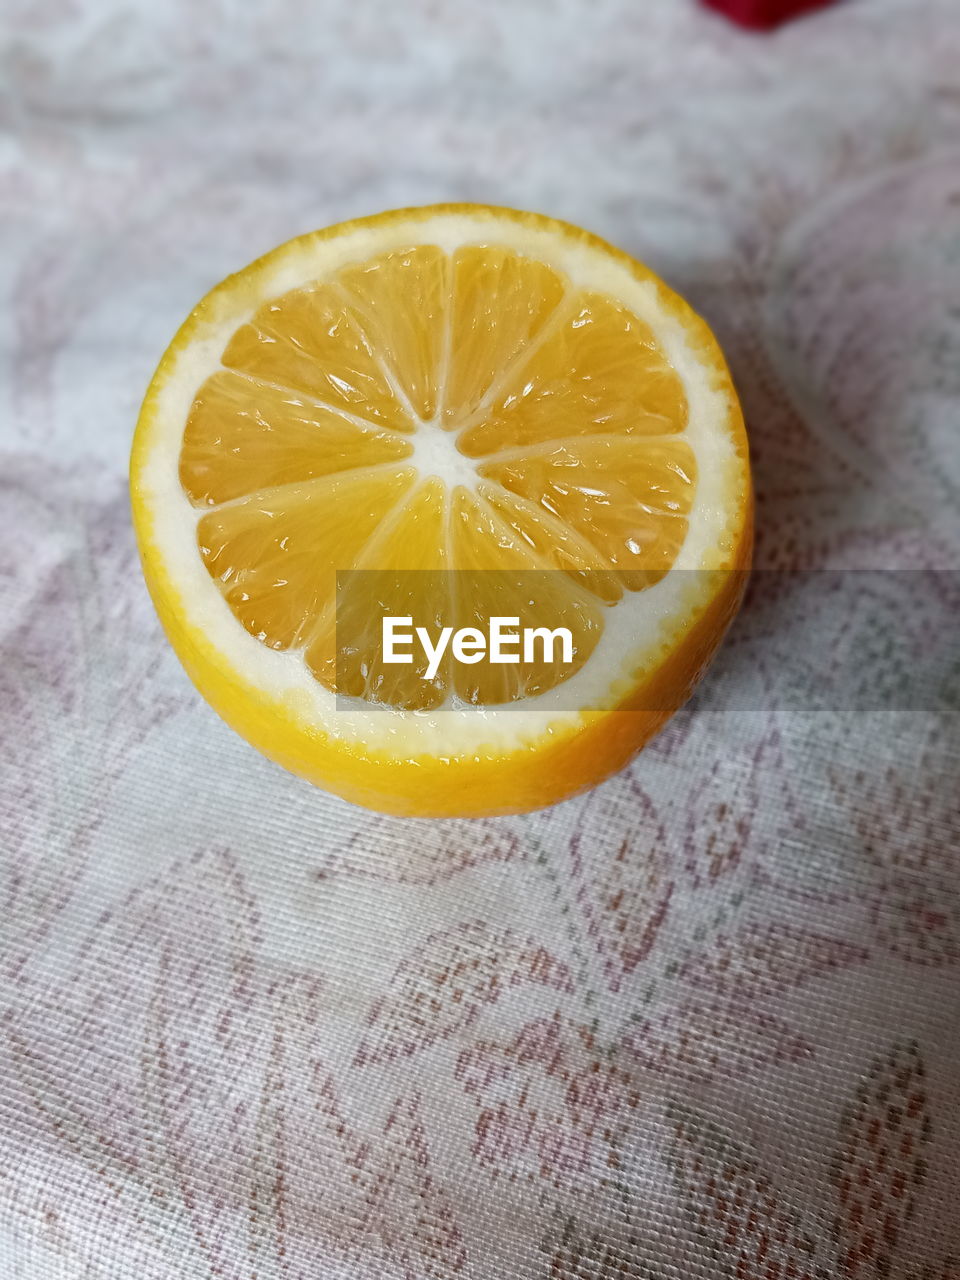 HIGH ANGLE VIEW OF LEMON IN PLATE